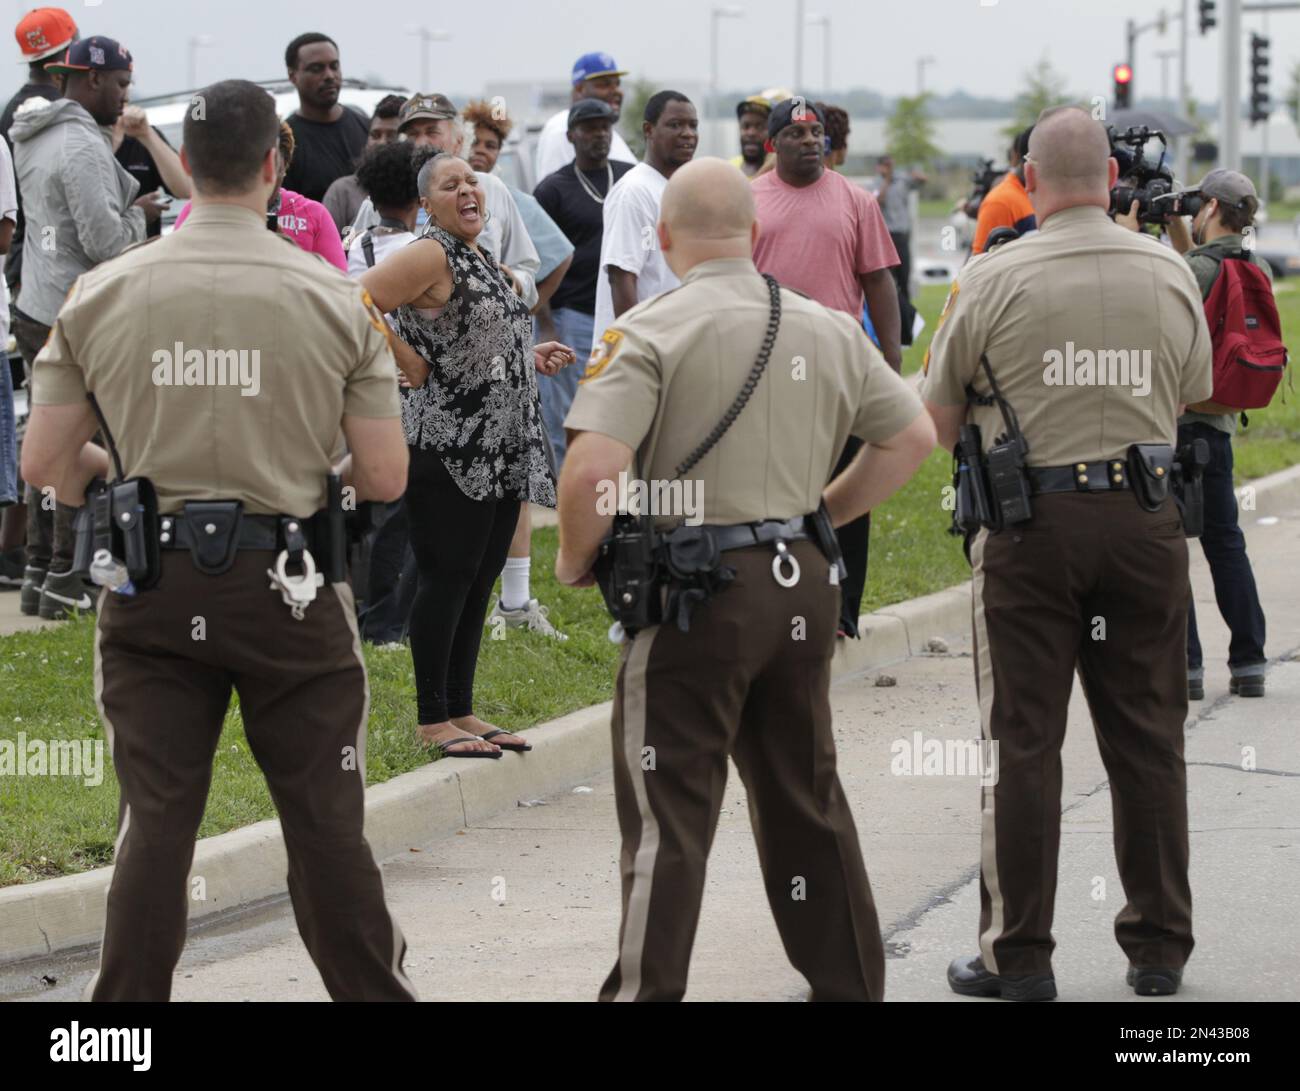 A protester shouts at St. Louis county police officers during a protest  aimed at shutting down Interstate 70 in Berkeley, Mo. on Wednesday, Sept.  10, 2014 near the St. Louis suburb of